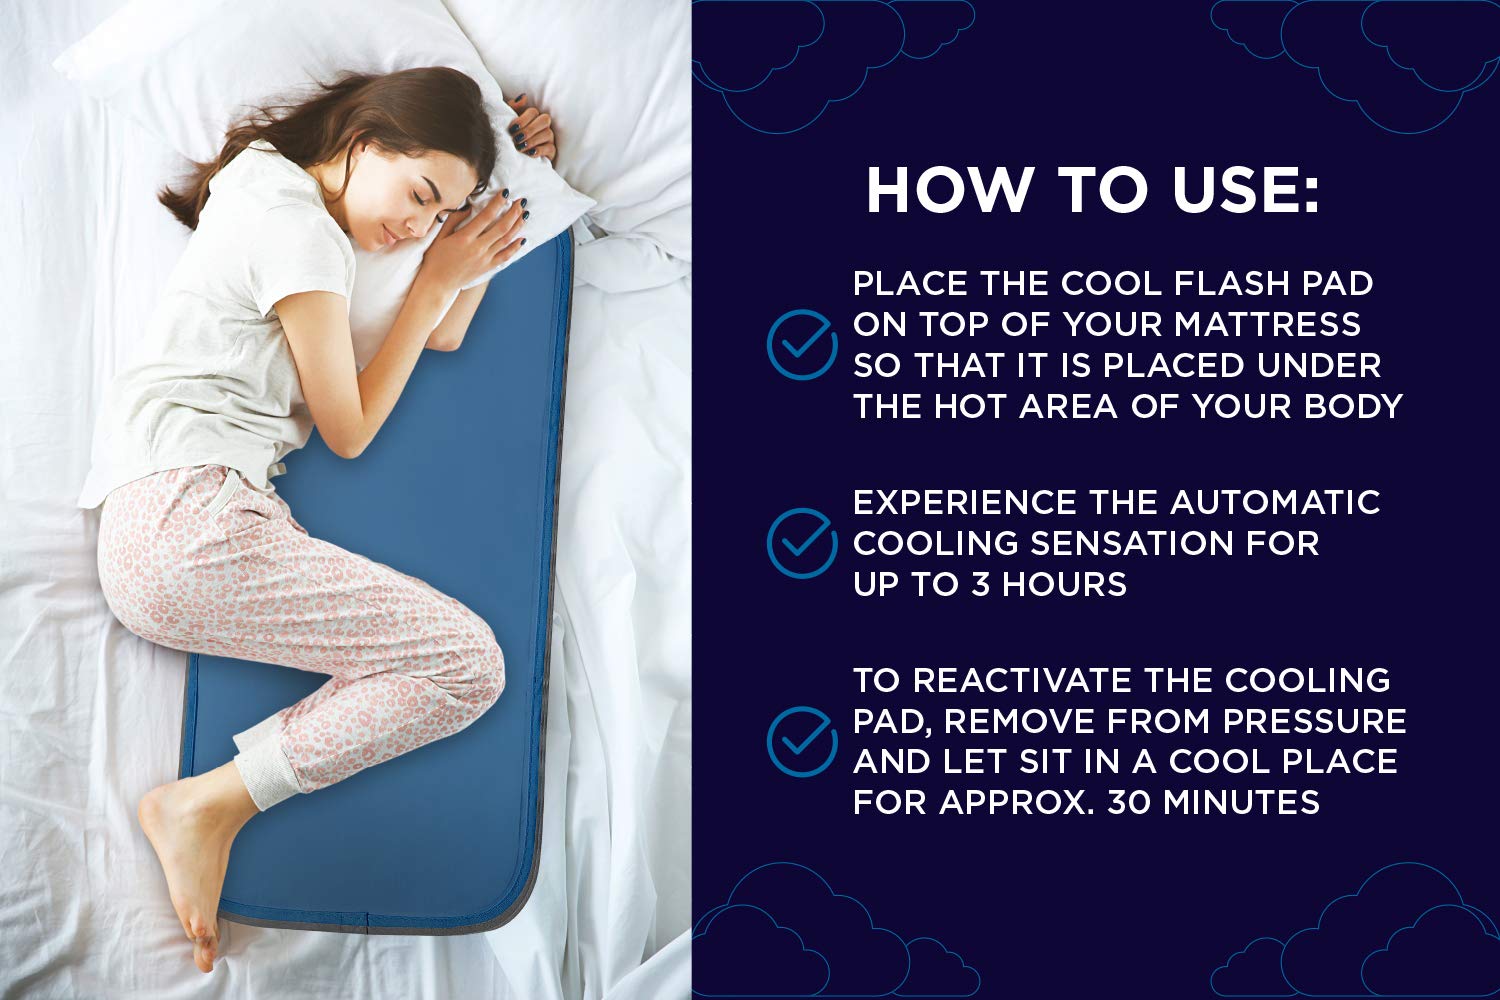 Cool Care Technologies - Revolutionary Self-Cooling Pillow & Body Pad